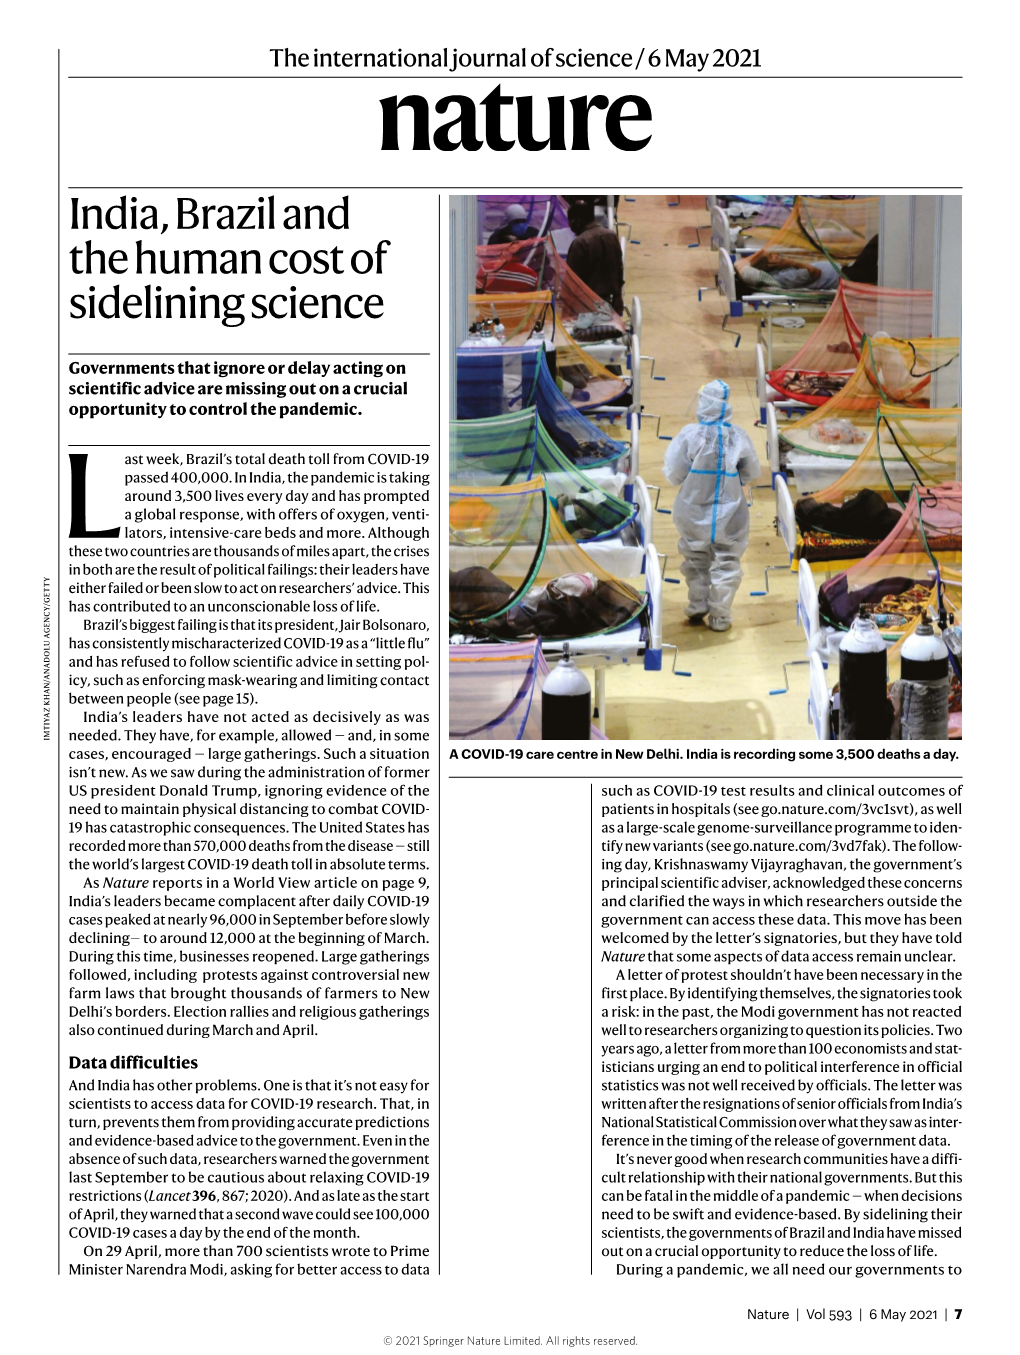 India, Brazil and the Human Cost of Sidelining Science